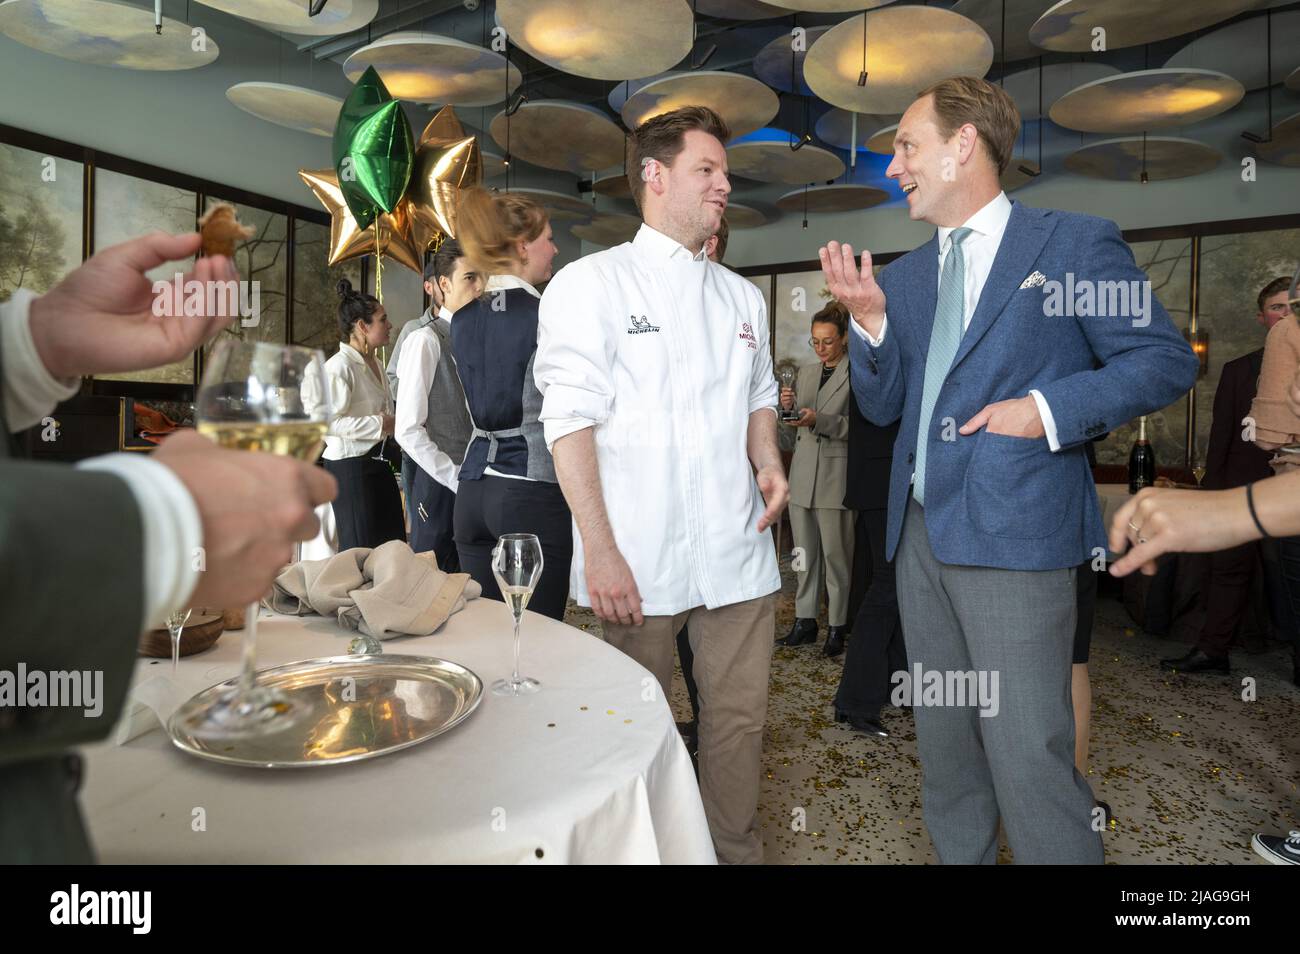 2022-05-30 14:29:35 AMSTERDAM - Chef Bas van Kranen of restaurant Flore (formerly Bord'Eau) opens the champagne in his own kitchen. The restaurant of Hotel De L'Europe was awarded two Michelin stars from scratch. ANP EVERT ELZINGA netherlands out - belgium out Stock Photo